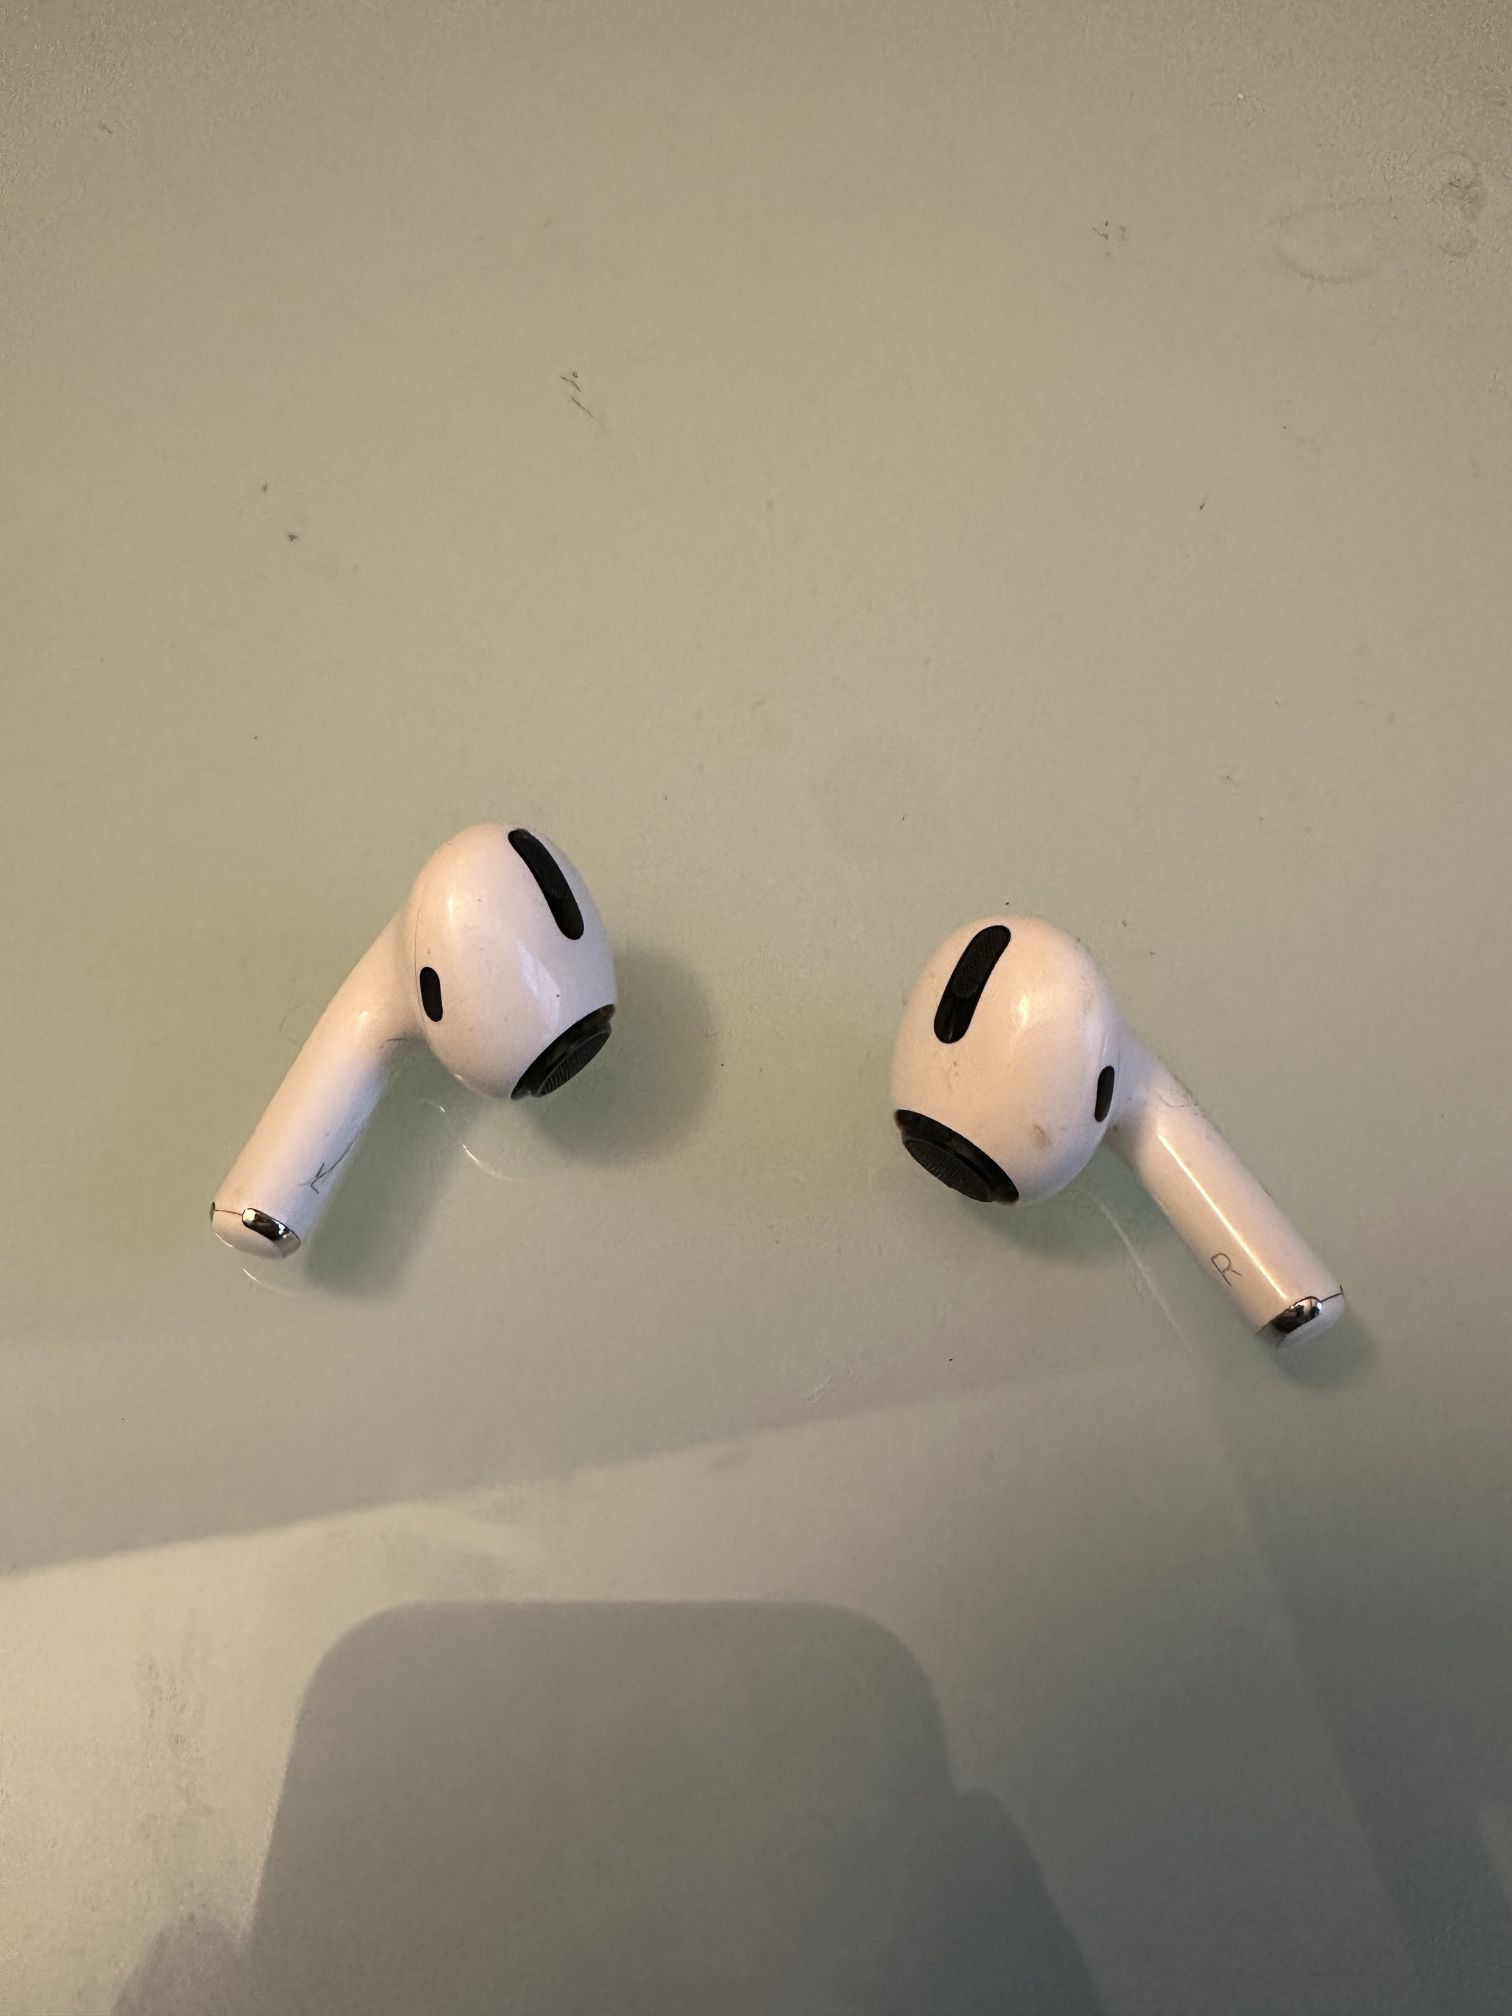 Apple AirPod Pros - Just Ear Buds (No Silicone Tips)